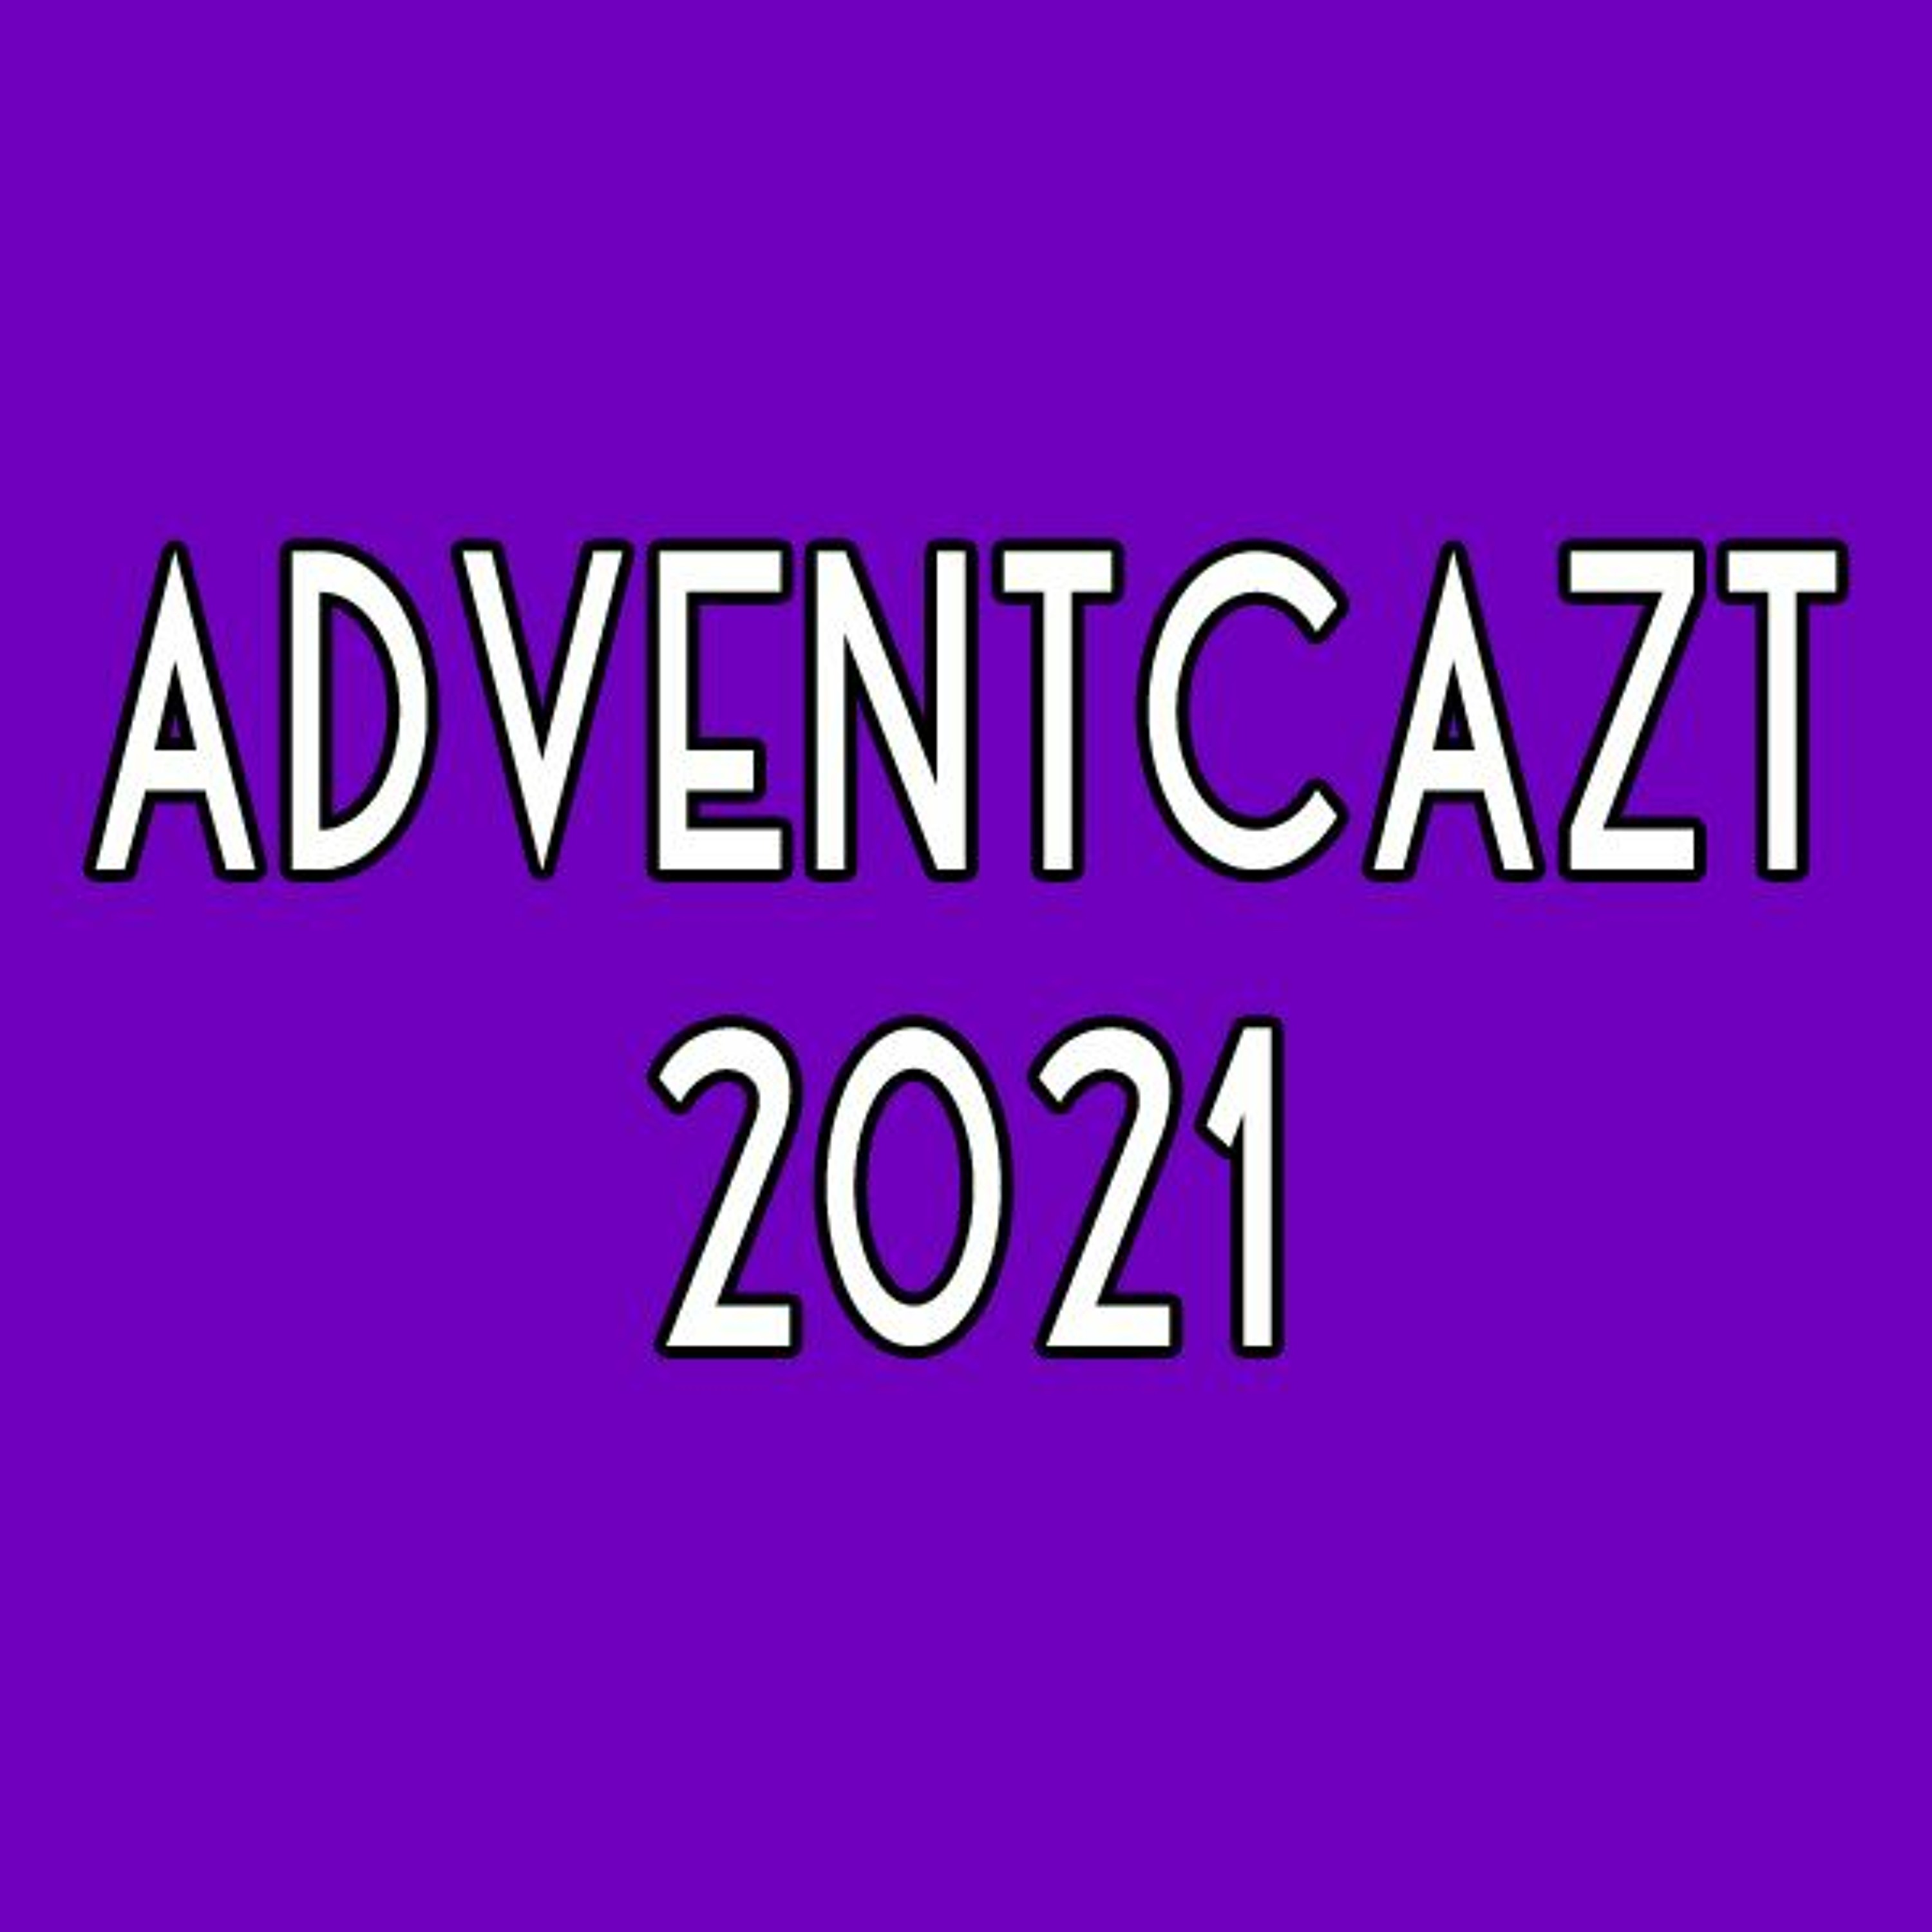 ADVENTCAzT 2021: 04 - Wednesday in the 1st Week of Advent